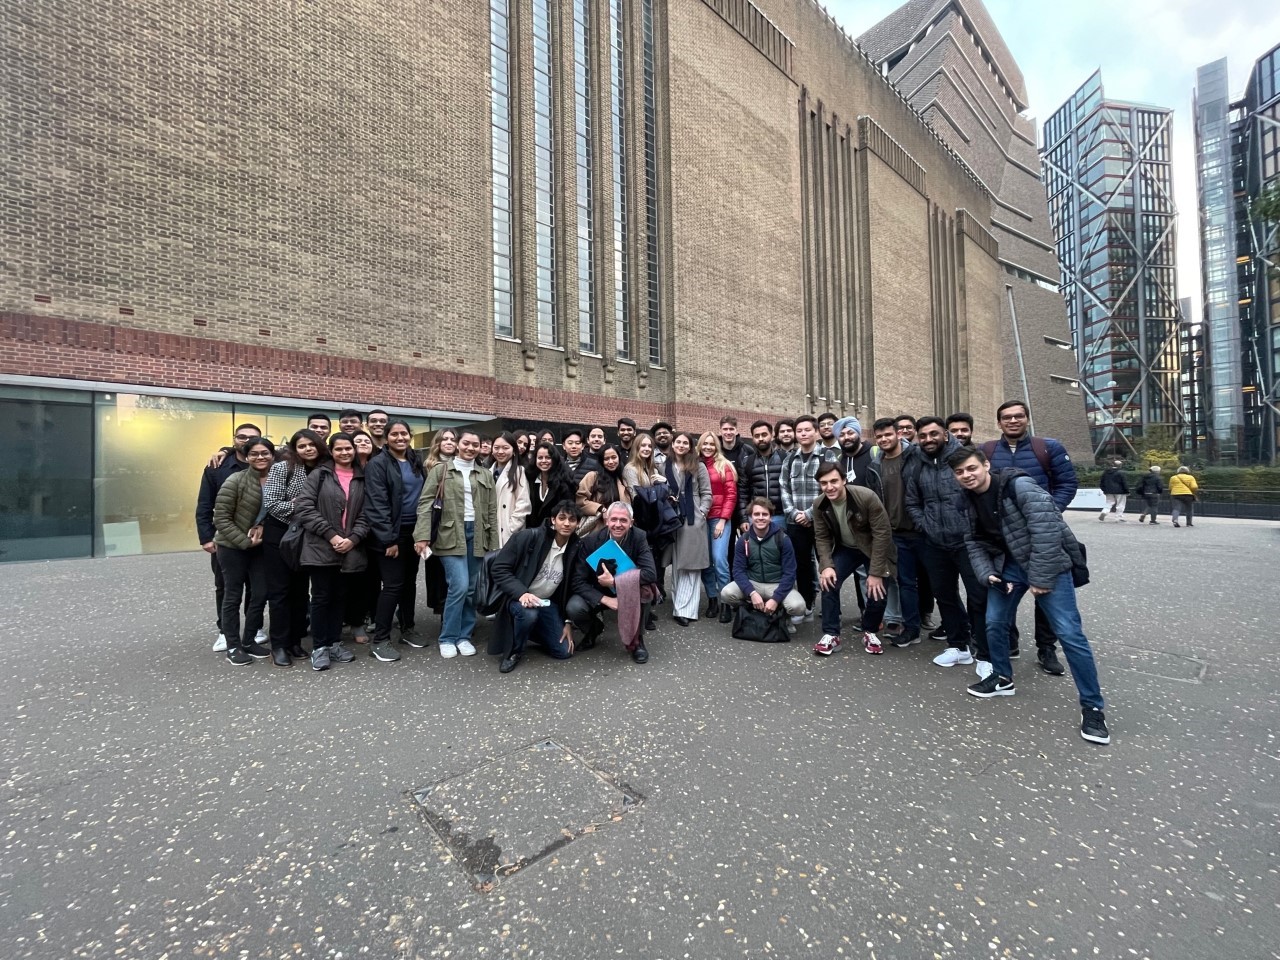 Students gather and smile outside Tate Modern